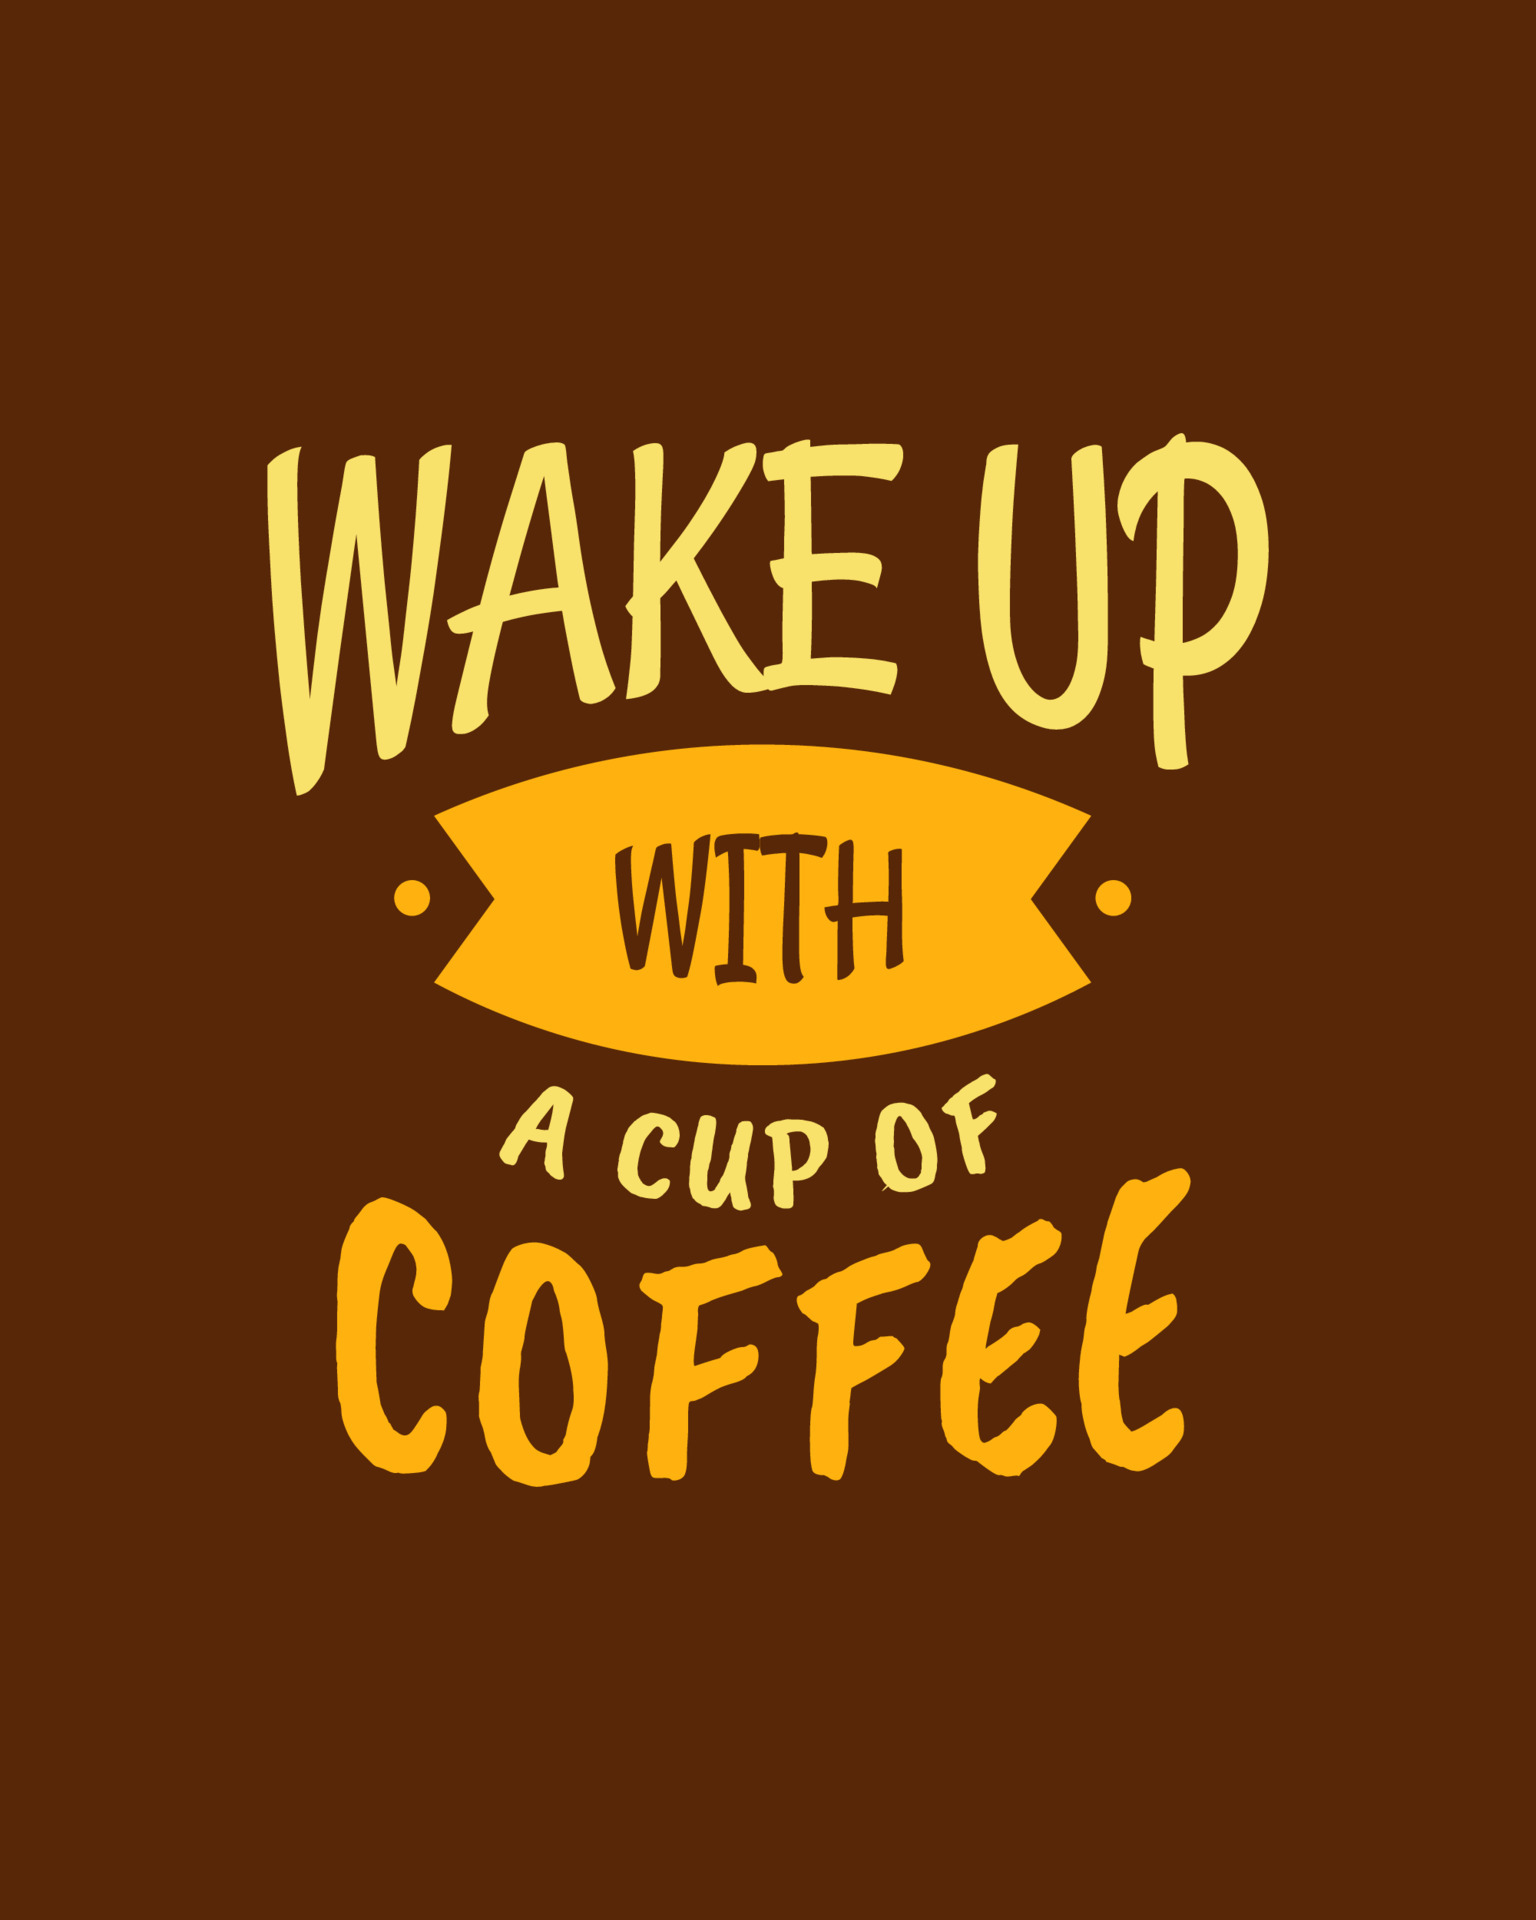 Quotes about coffee. Wake up with a cup of coffee. Design for ...